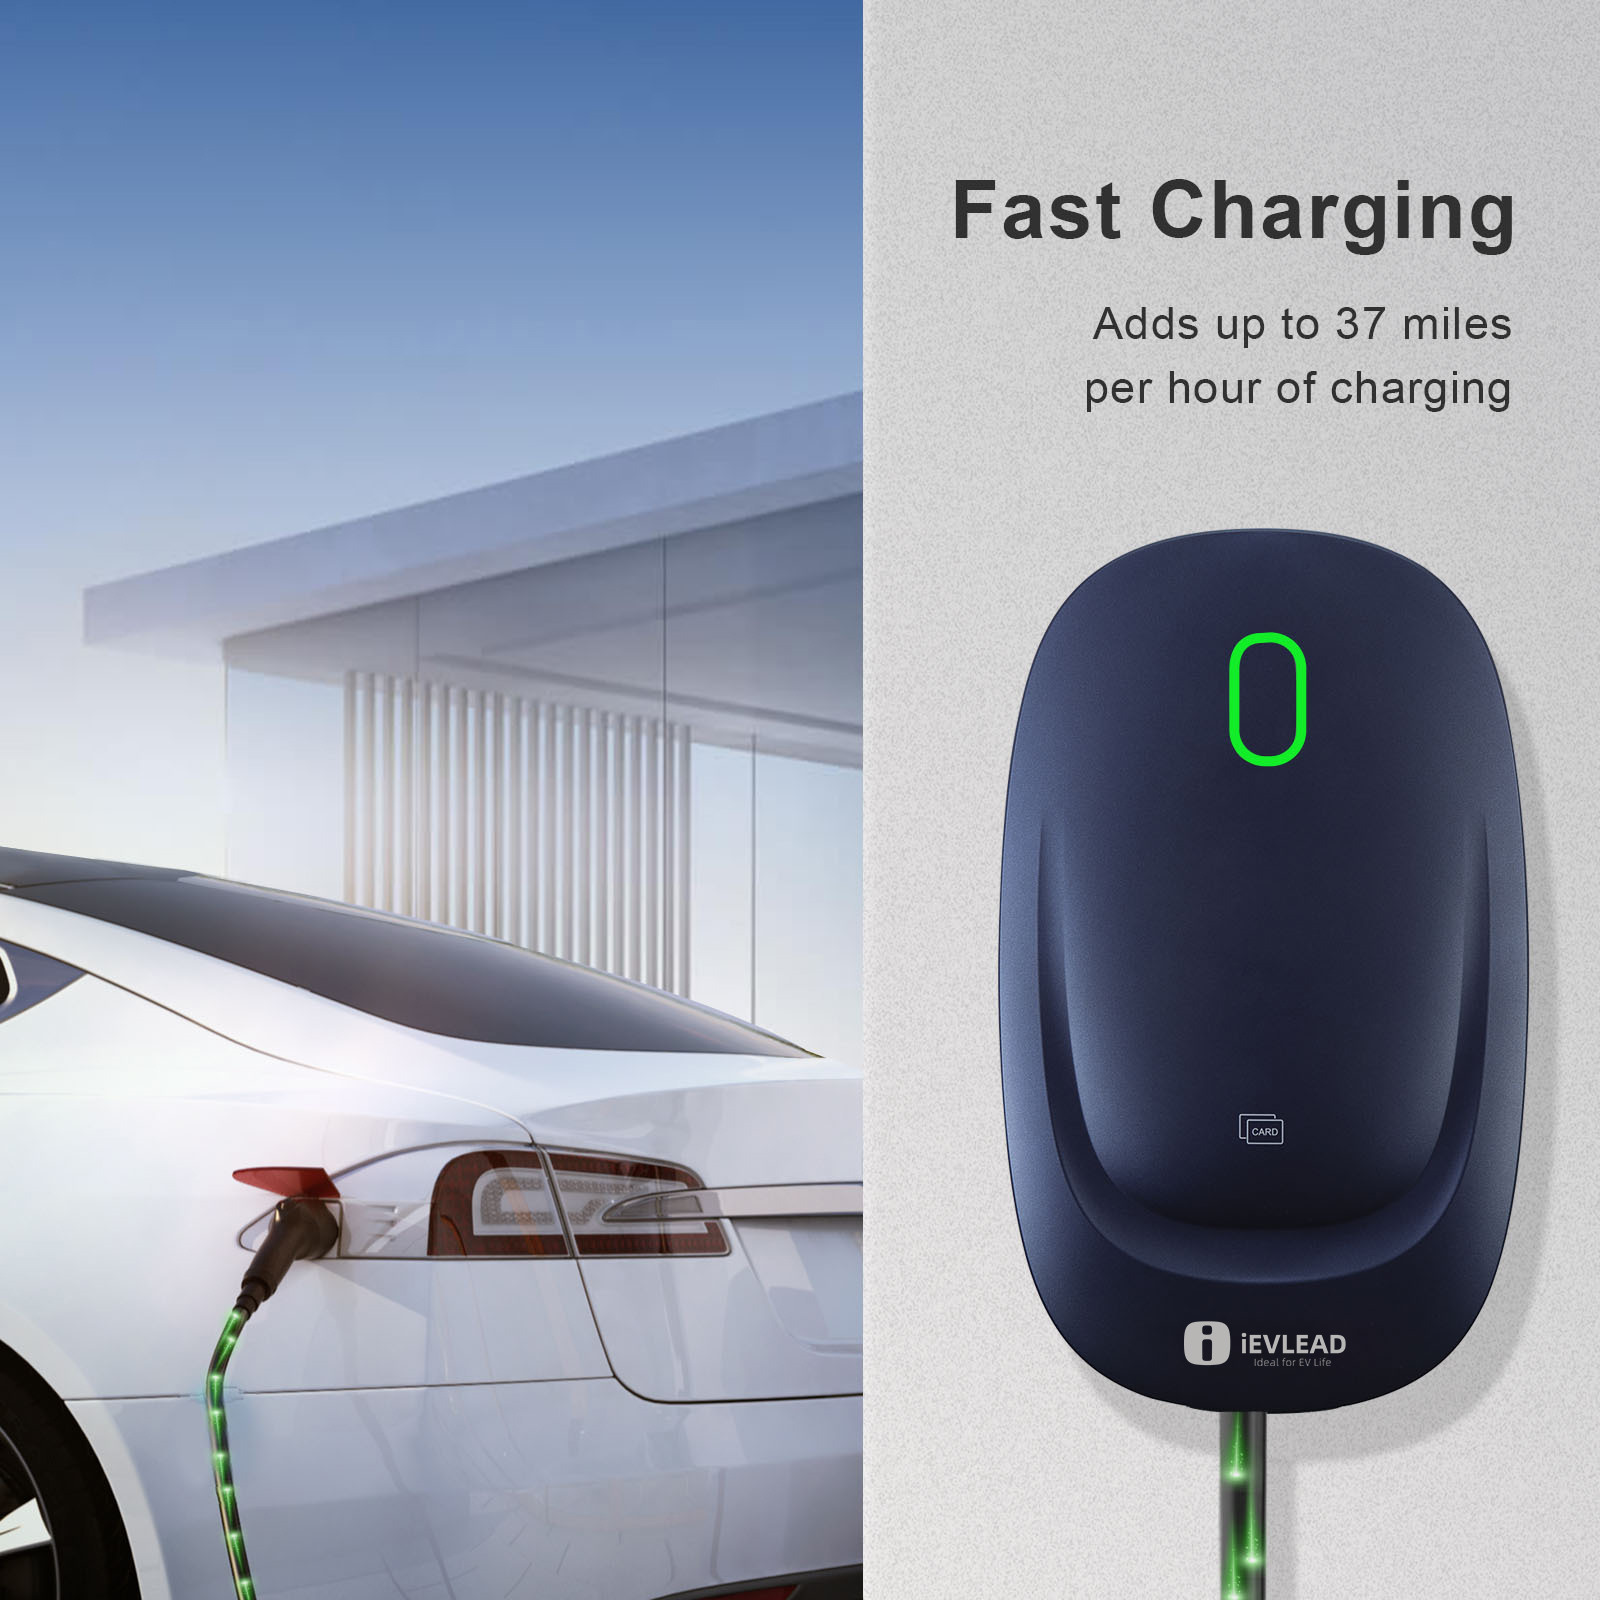 J+ BOOSTER 2 portable EV charger review: More bang for your buck